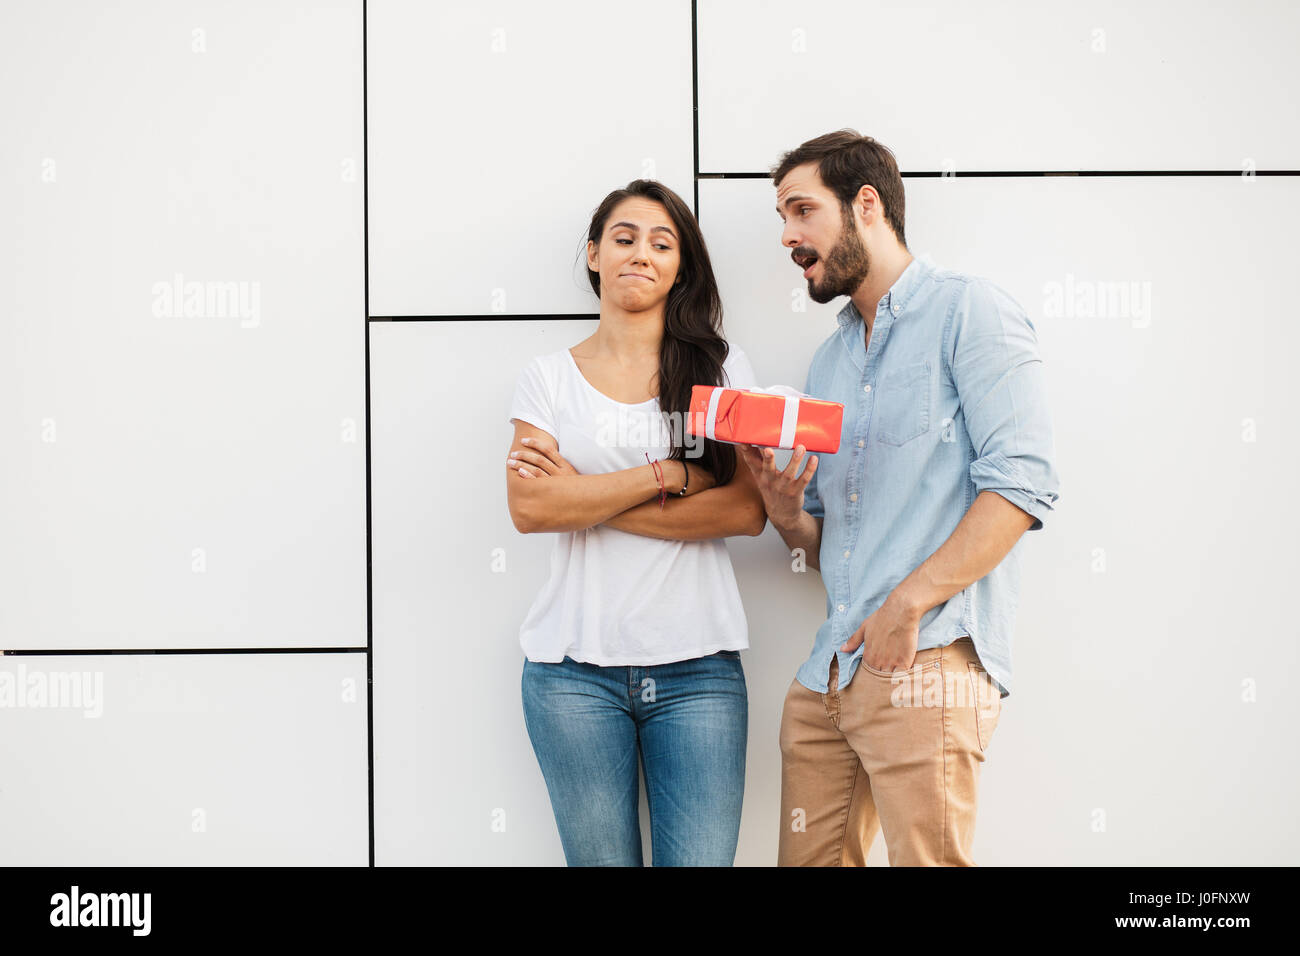 young man trying to reconcile his girlfriend offering her a gift Stock Photo